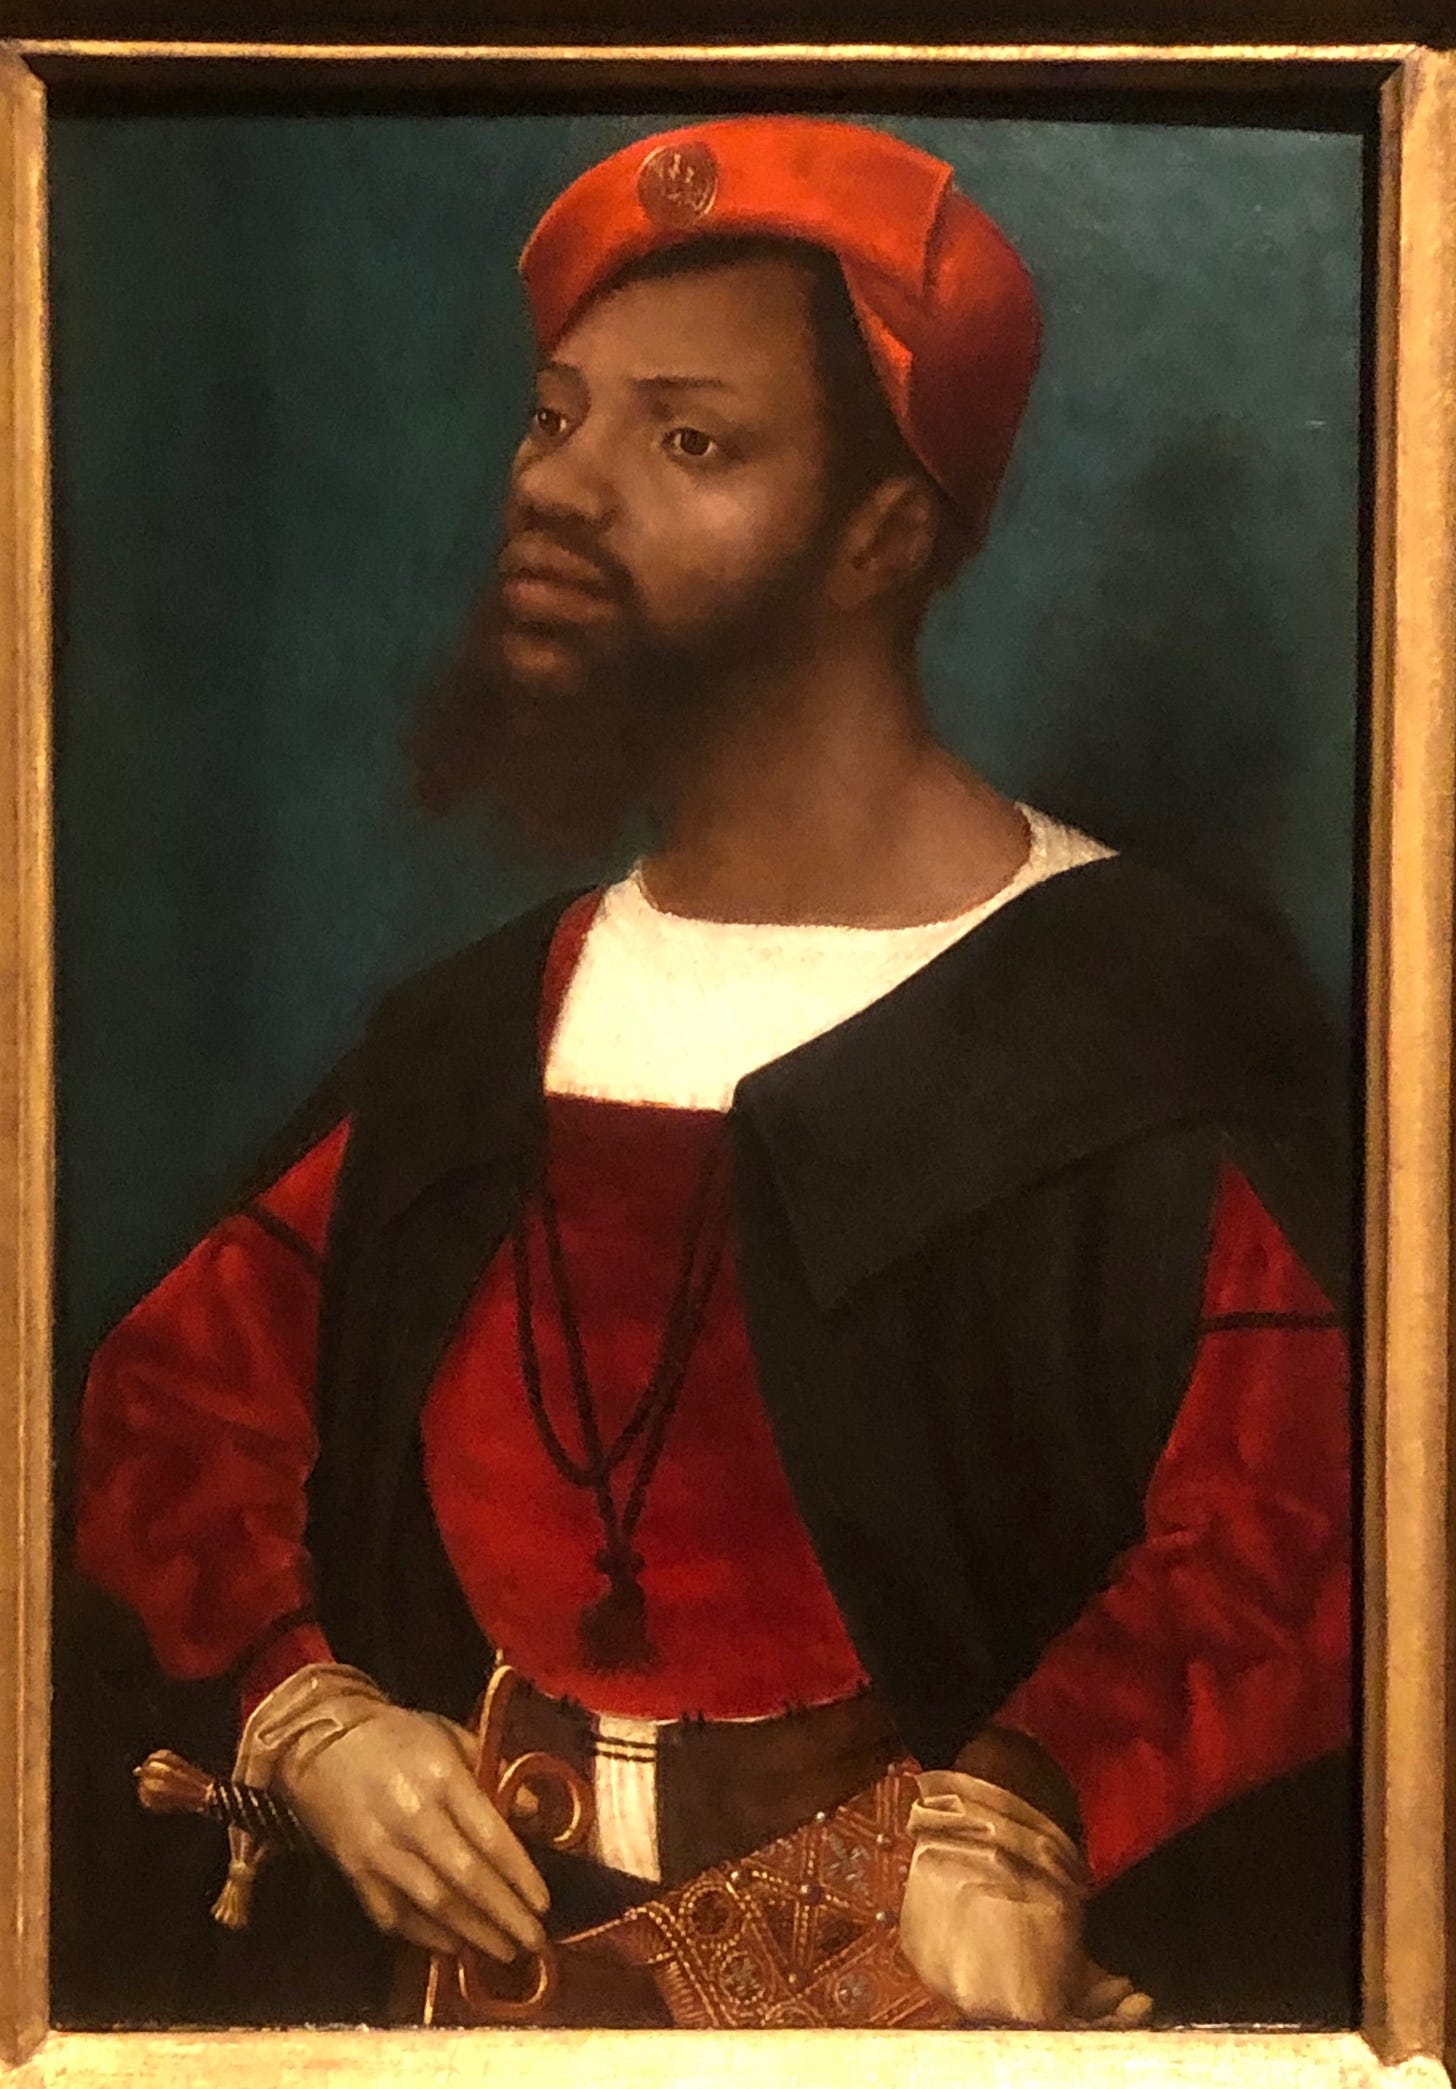 Portrait of a Black man in a cap with a badge on it, an elegant outfit, gloves, and a sword and jewelled golden scabbard.